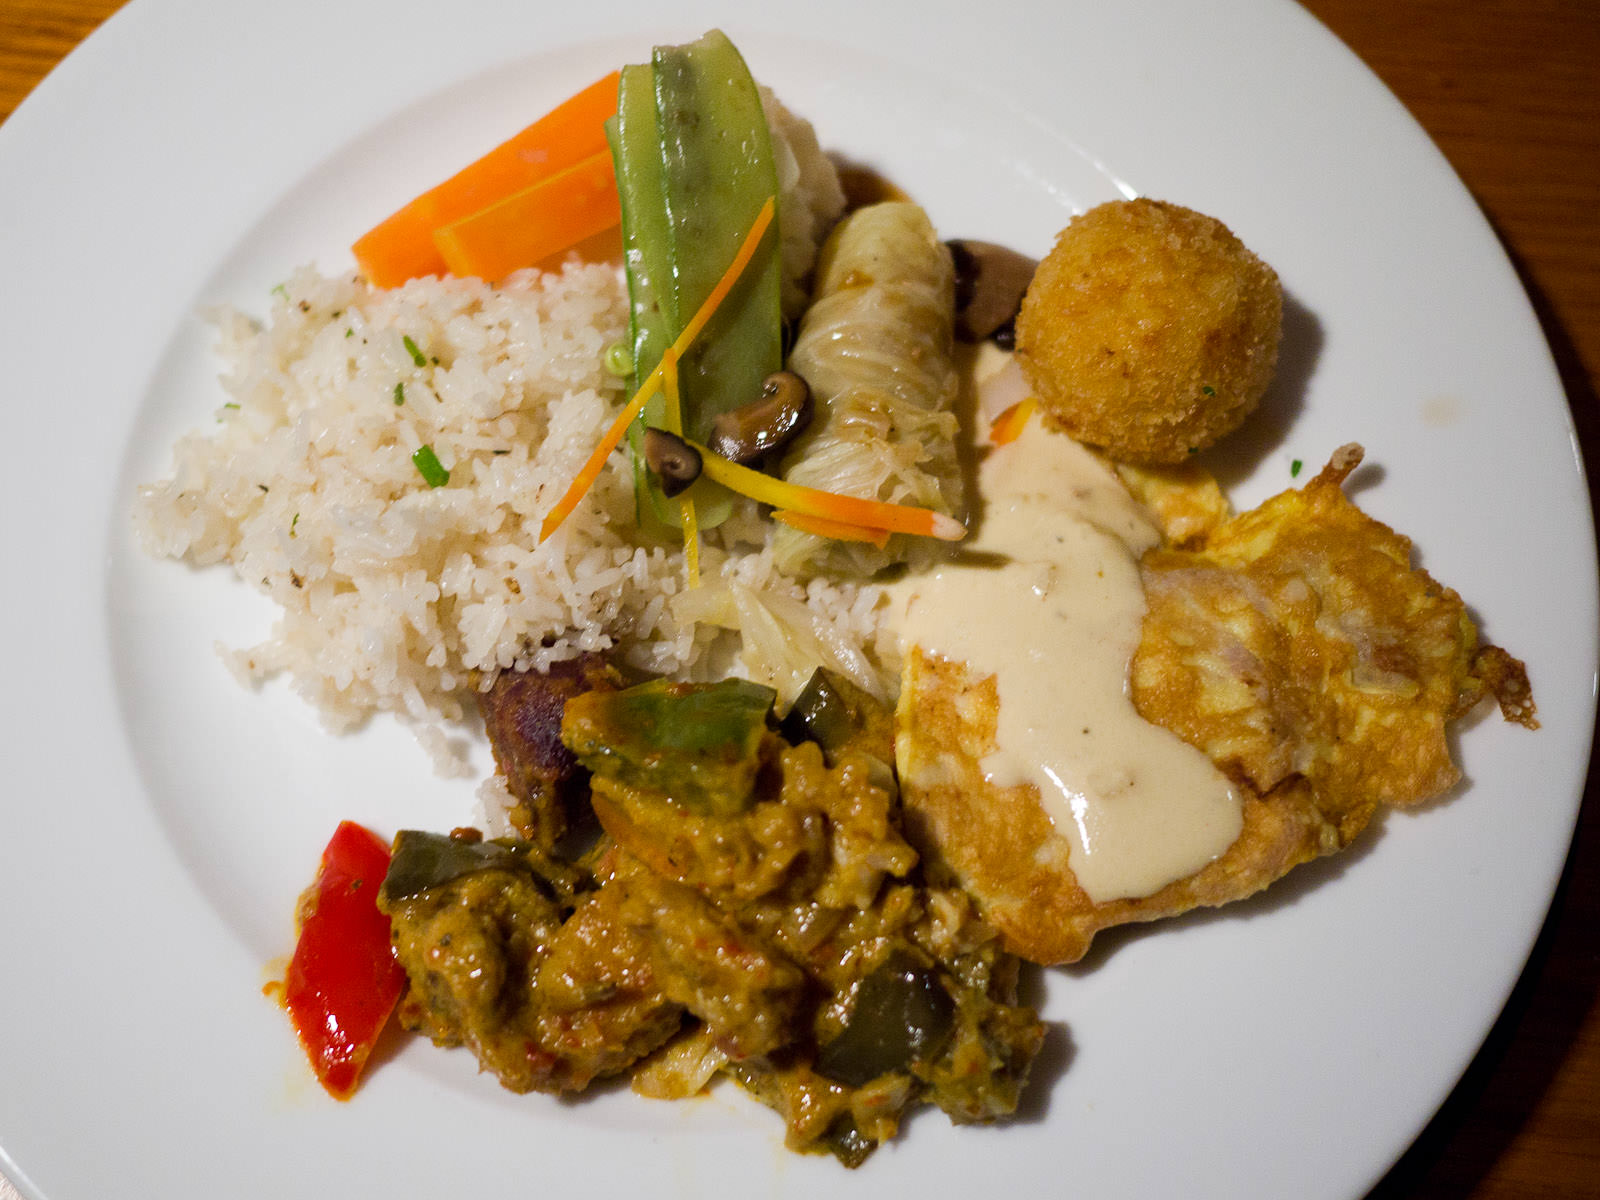 Diner buffet: pork Milanese with potato croquettes, Cambodian fish curry with lemongrass rice, steamed vegetables